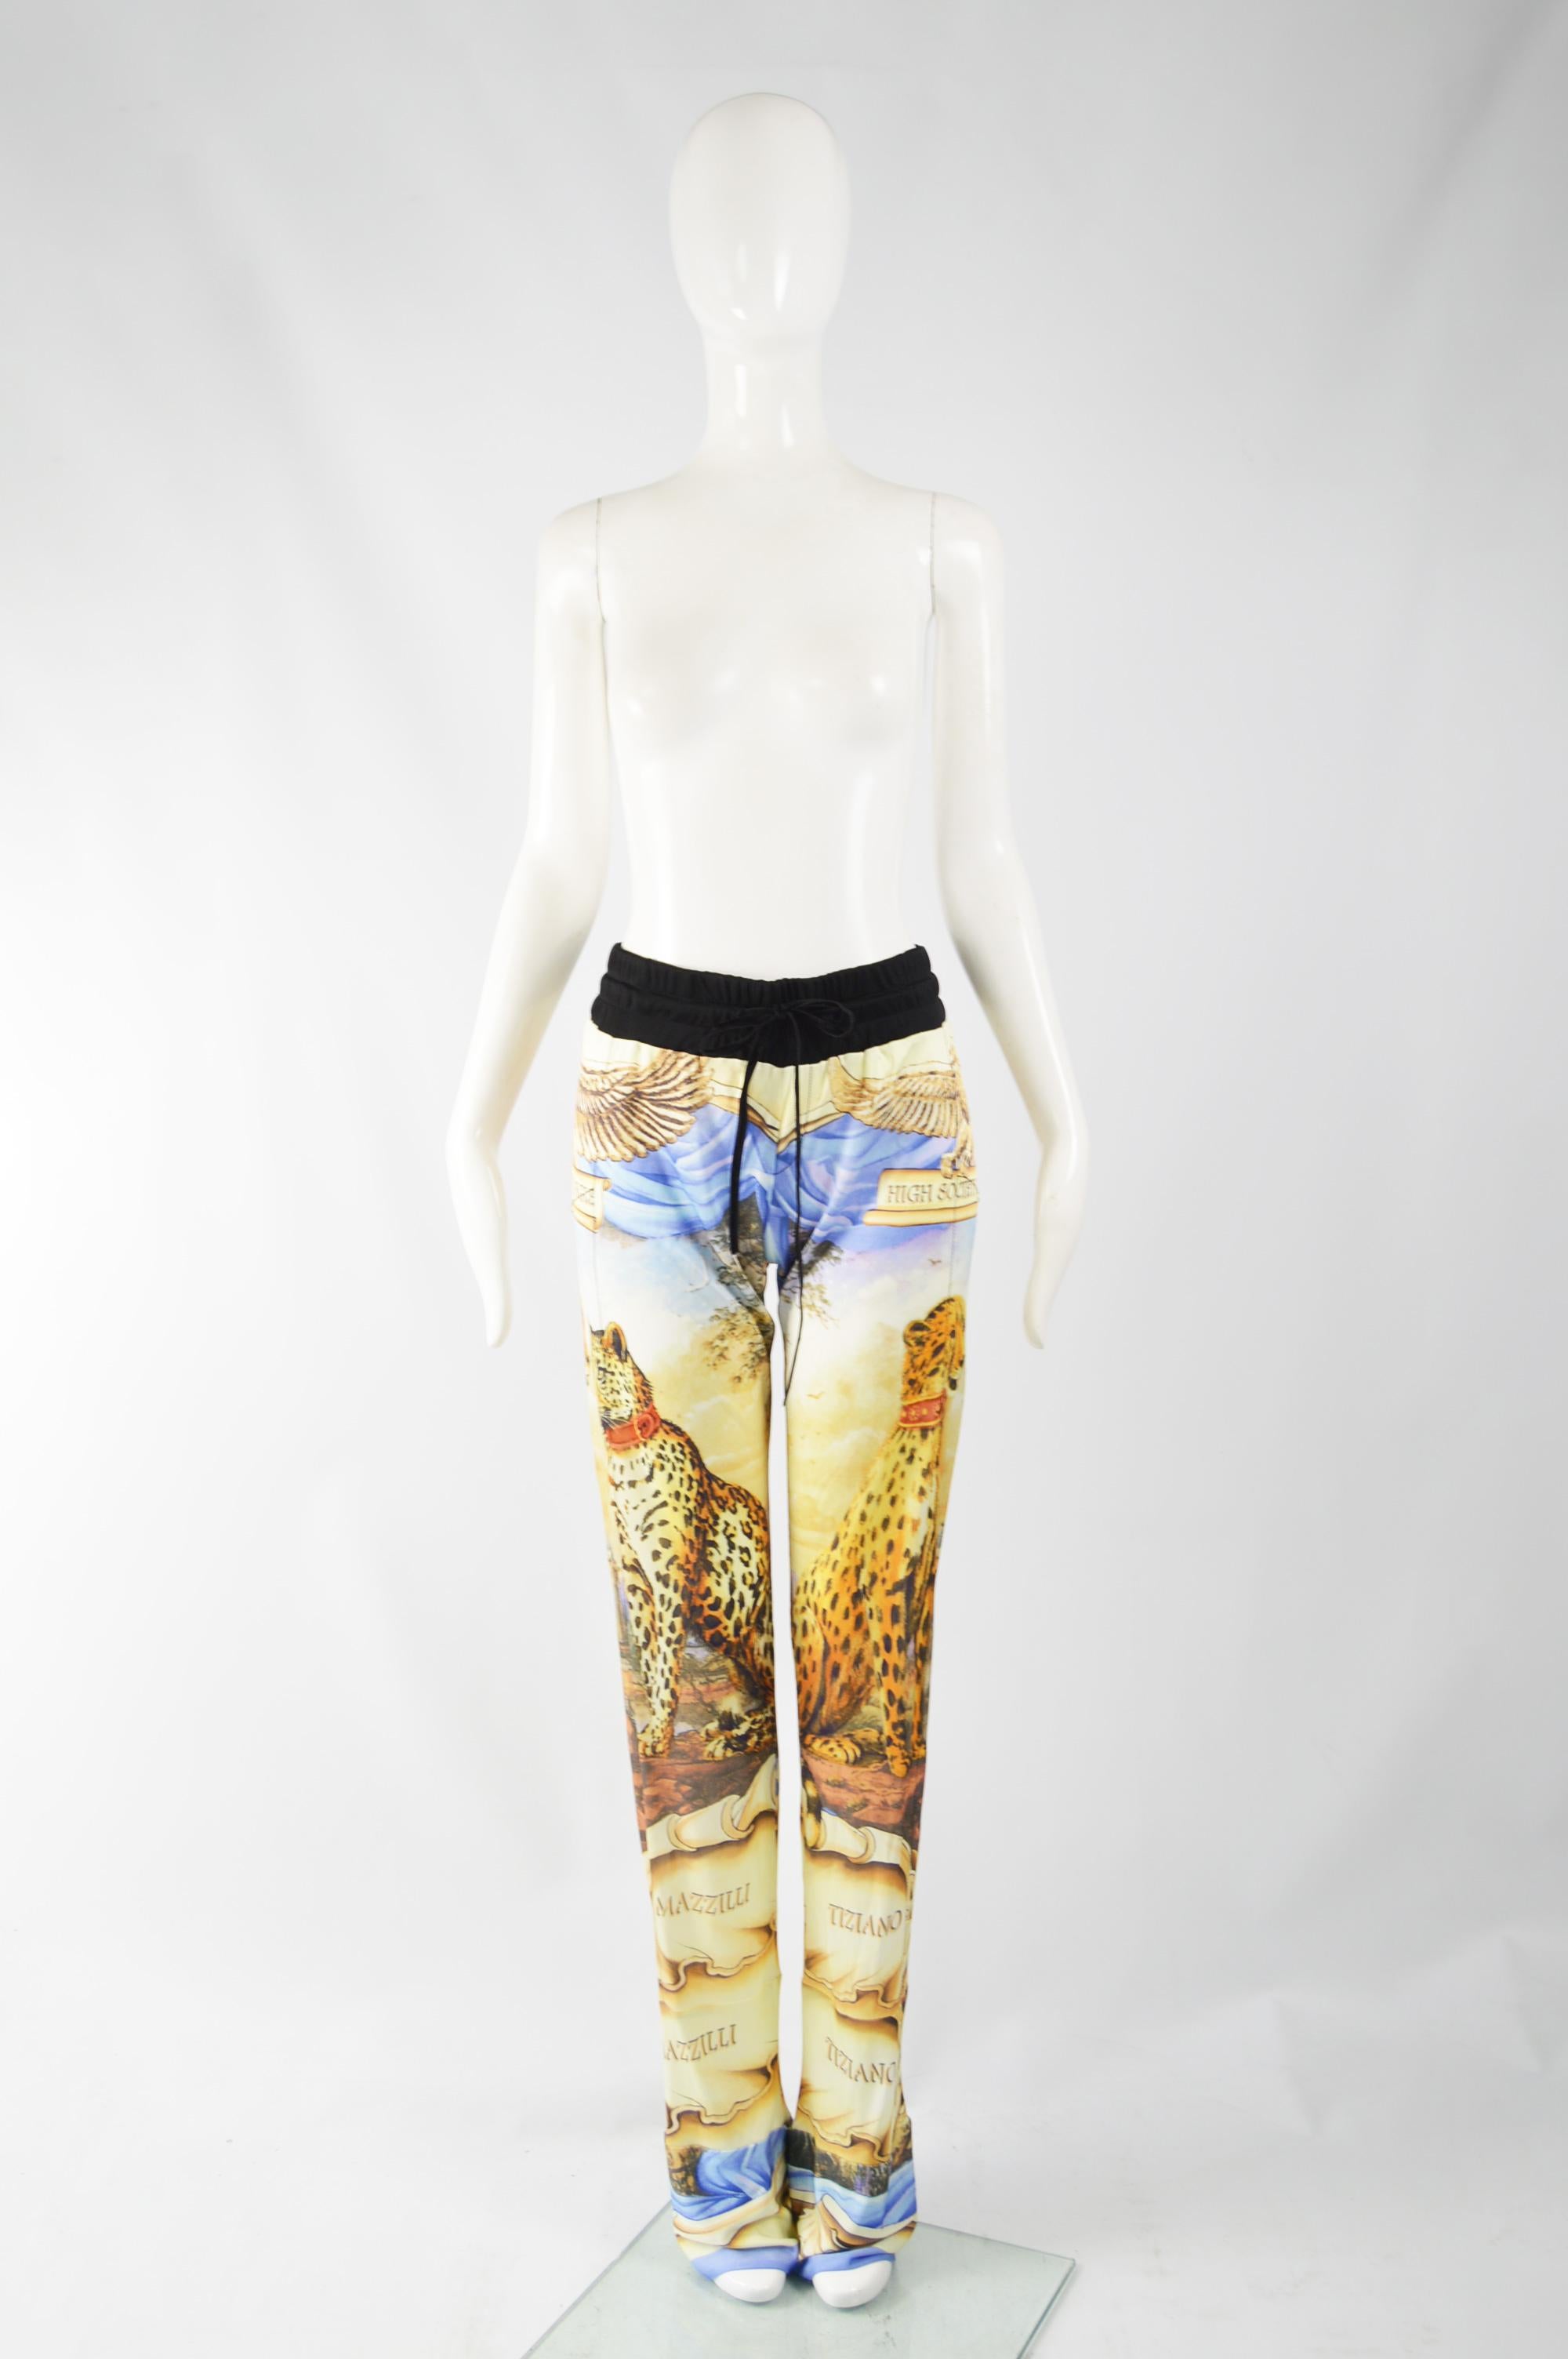 A beautiful pair of womens pants by iconic designer, Tiziano Mazzilli the founder of the legendary 90s boutique Voyage of London (which became renowned for its ultra expensive, bohemian inspired look and strict members only door policy, having